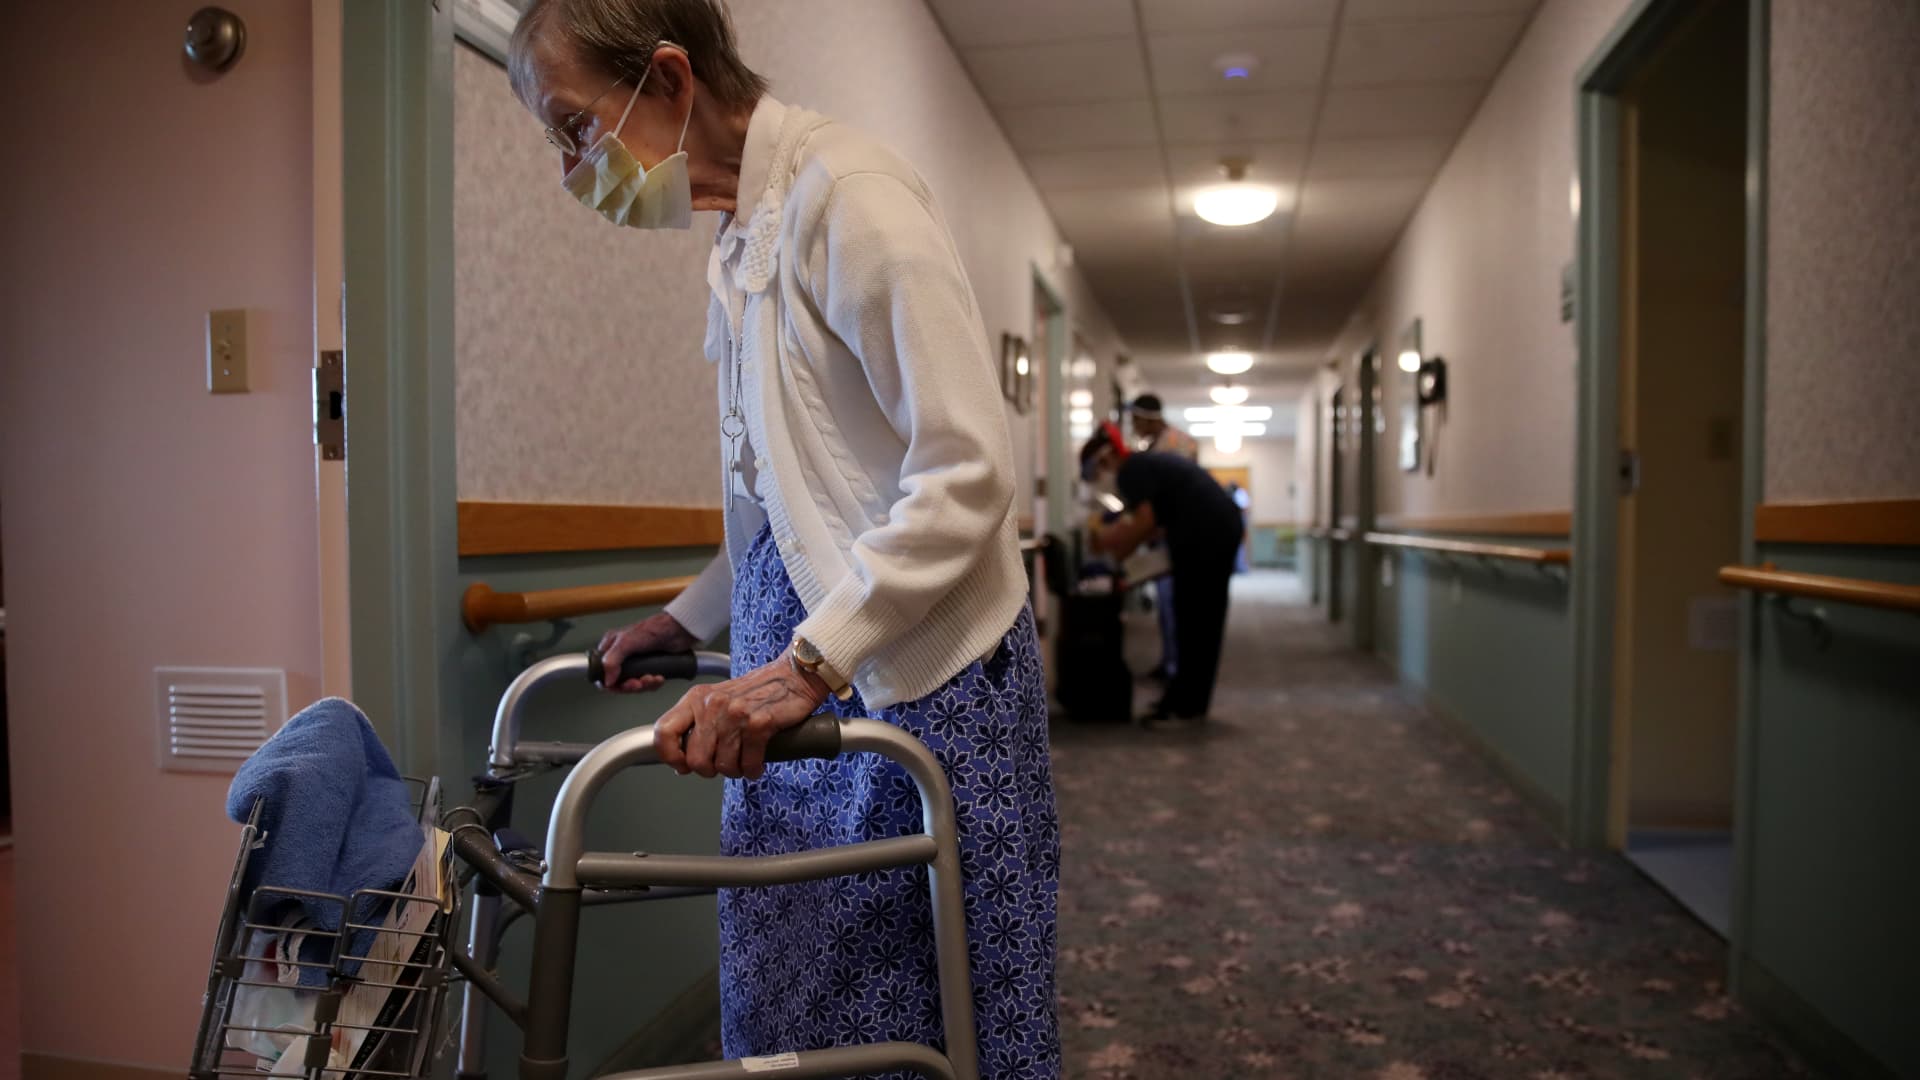 Sr. Jeanne Arsenault returns to her room after breakfast at St. Chretienne Retirement Residence, a home for Catholic nuns in Marlborough, MA on August 26, 2020. Arsenault fell ill to COVID-19 during the outbreak.